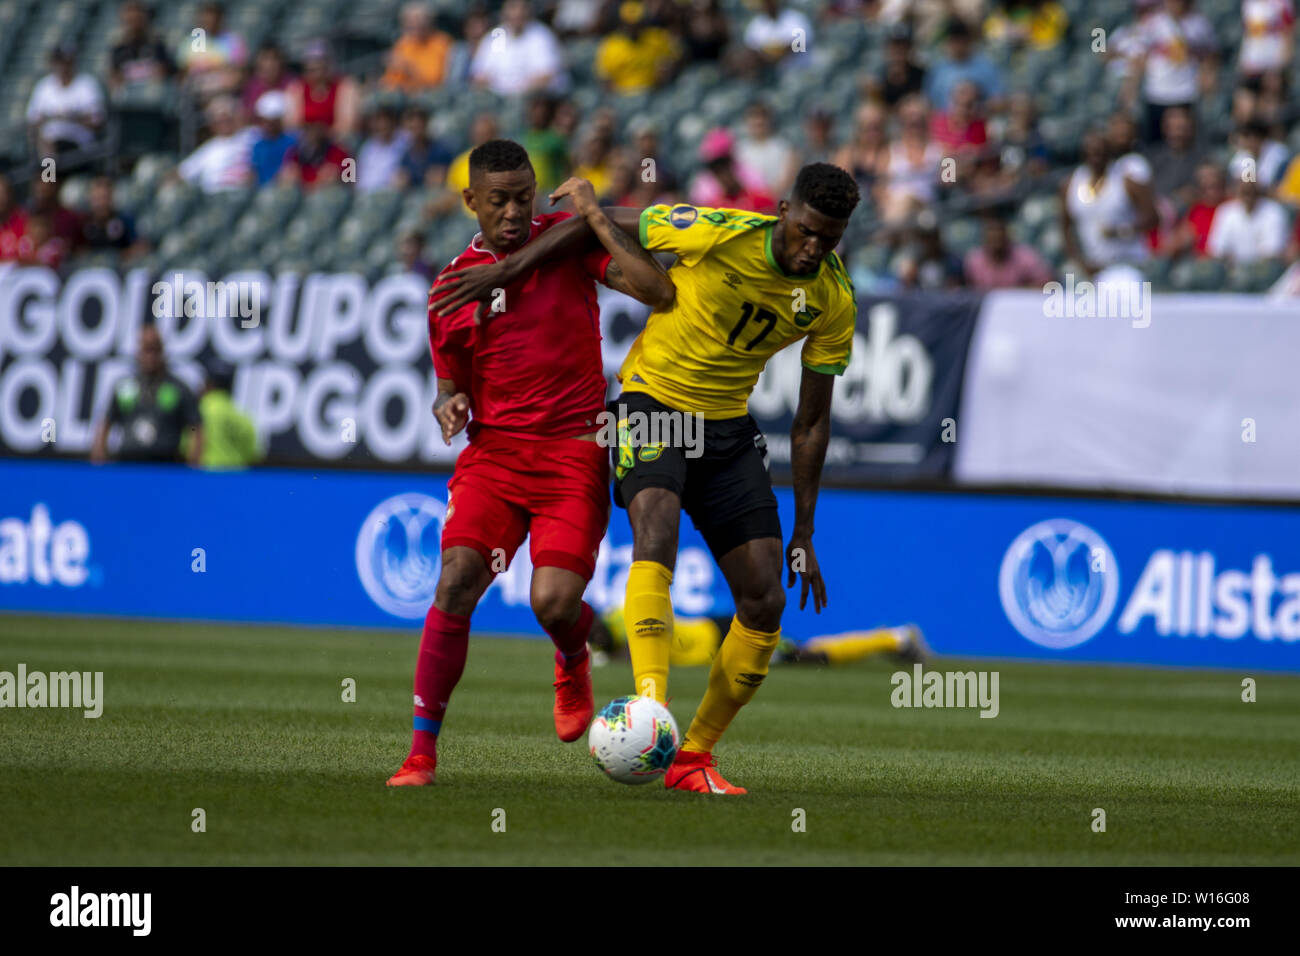 Philadelphia, Pennsylvania, USA. 30th June, 2019. GABRIEL TORRES (9) fights for the ball with DAMION LOWE (17) during the match the match in Philadelphia PA Credit: Ricky Fitchett/ZUMA Wire/Alamy Live News Stock Photo